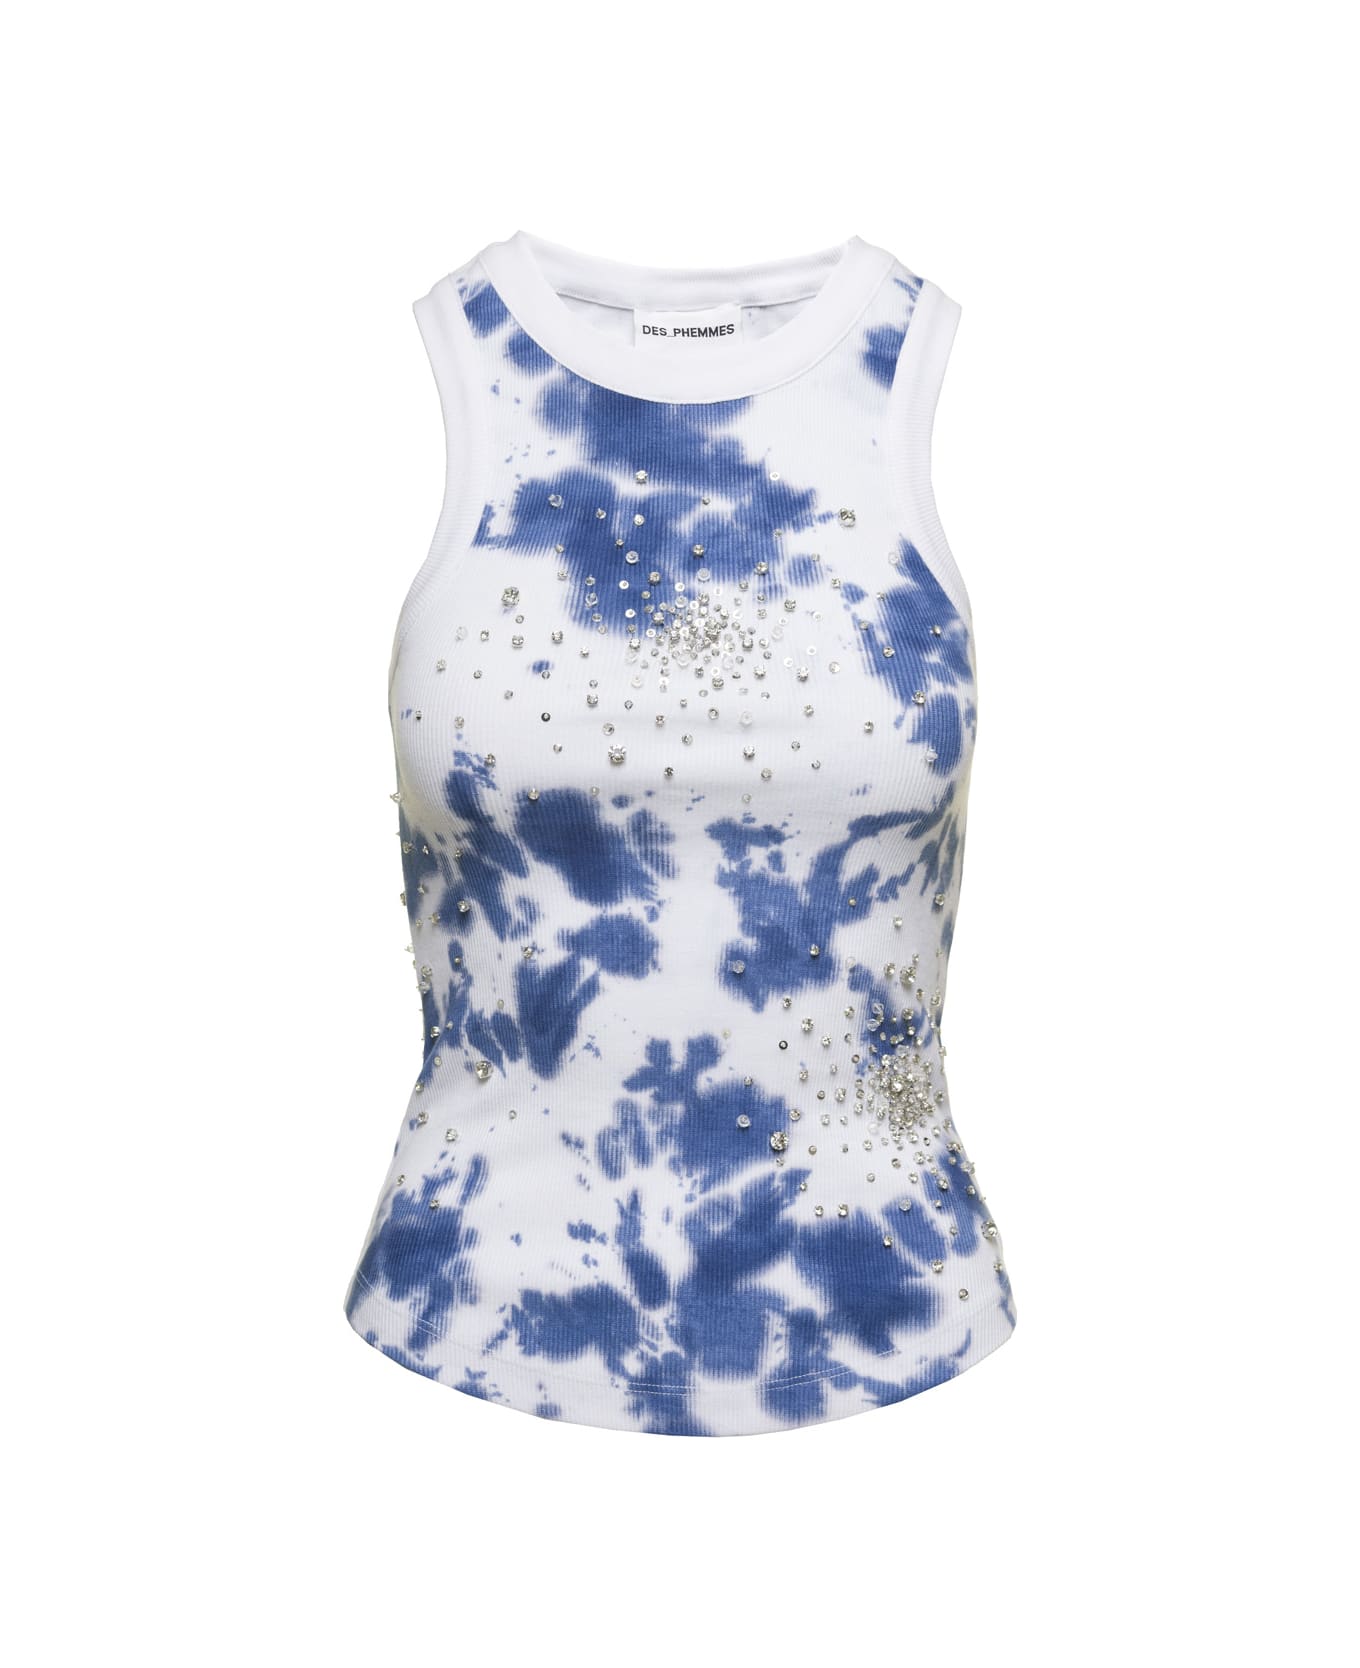 Des Phemmes White Tank Top With Sequins And Tie Die In Cotton Woman - Blu